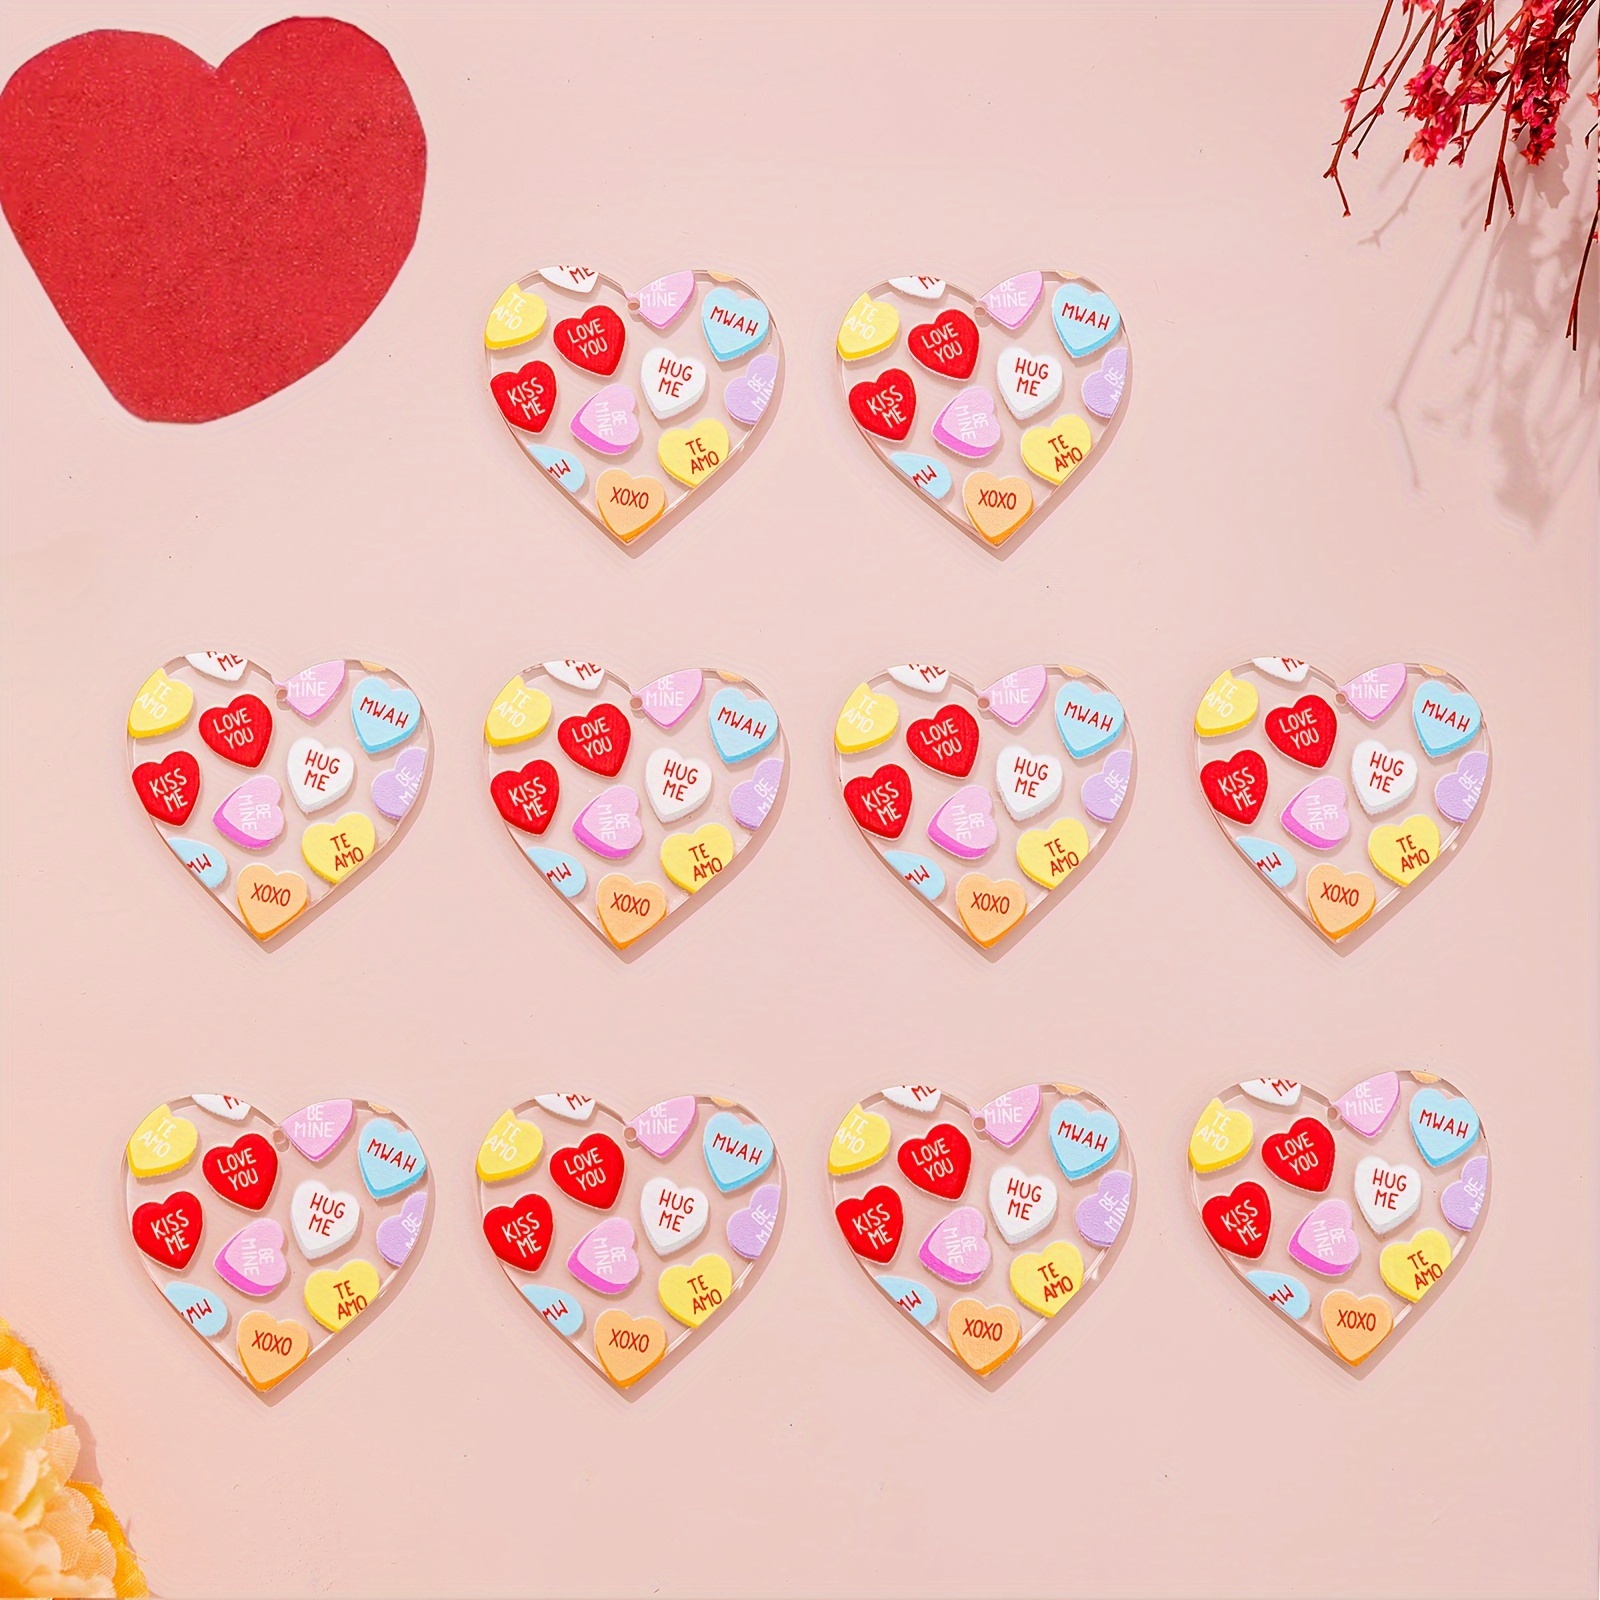 10pcs Valentine's Day Theme Red Heart Acrylic Charms For Diy Earrings Key  Chain Necklace Jewelry Making Accessories, Check Out Today's Deals Now